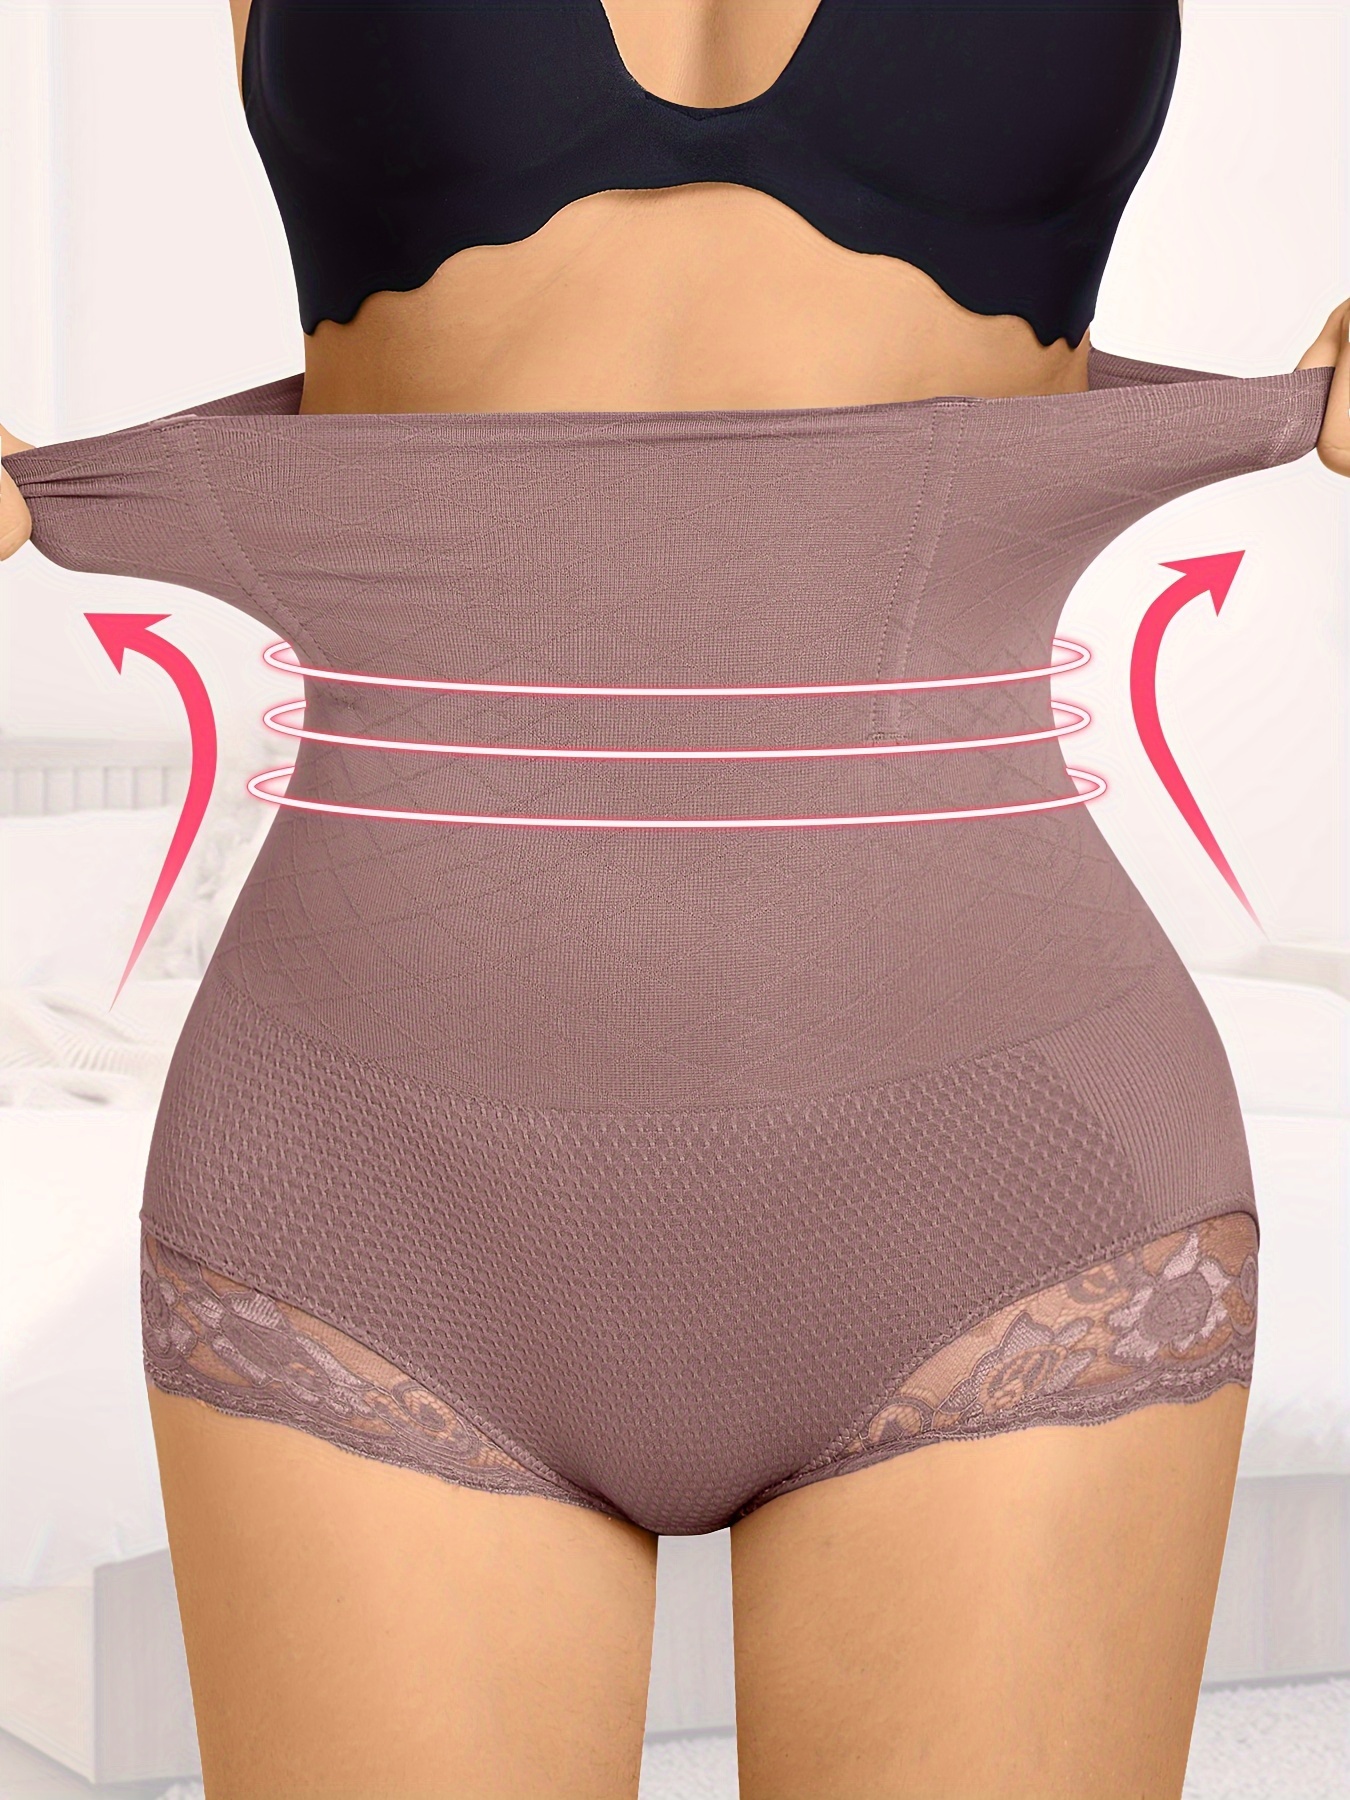 Women's Seamless Butt Lifter Shorts - Body Shaper Panty for Lifted